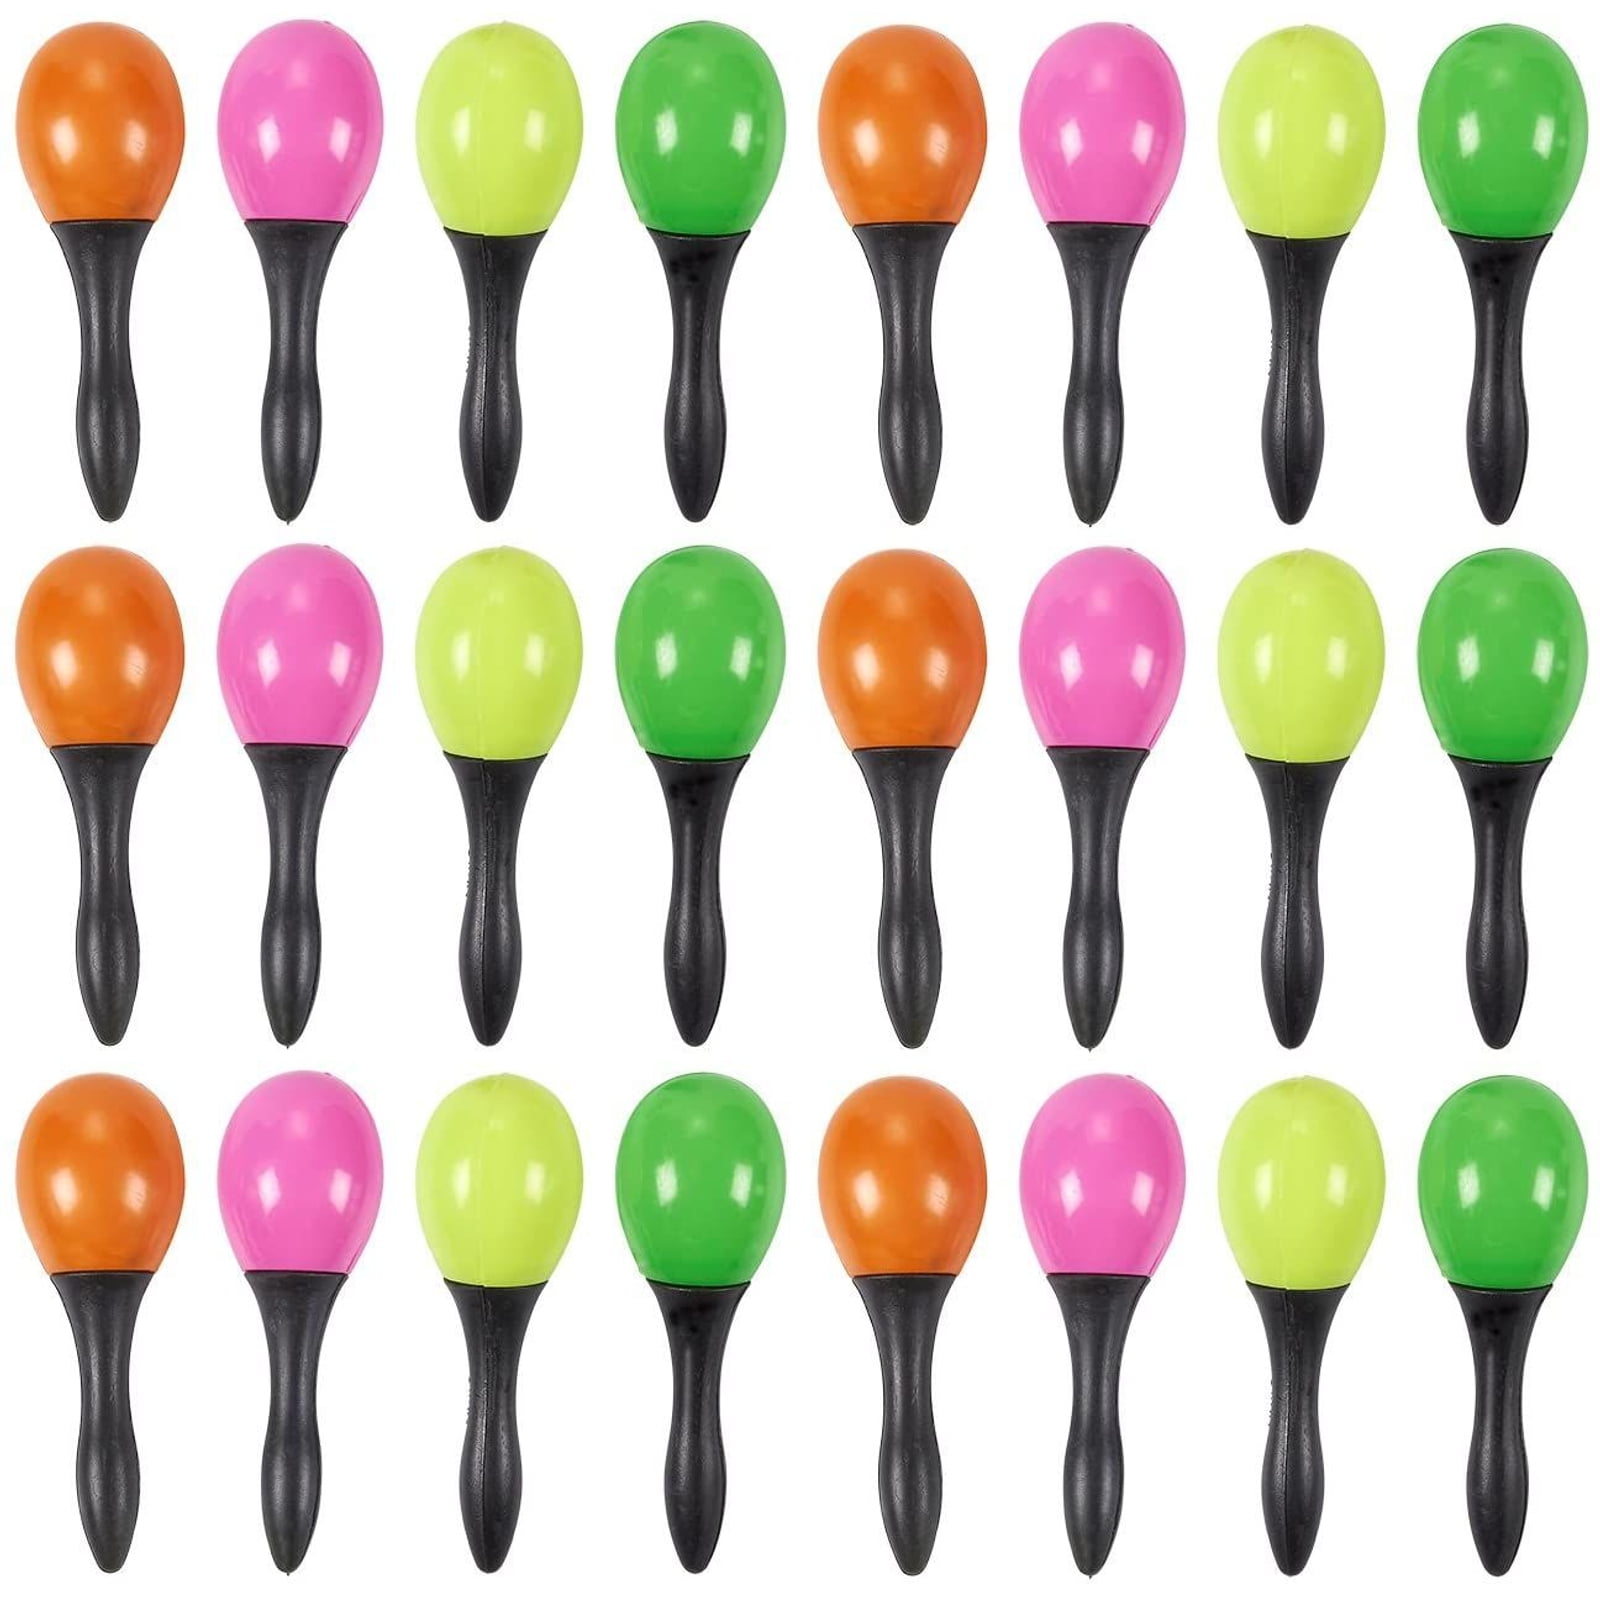 Kidsco Bright Neon Maracas Salsa Themed Party Musical Instrument for Fiesta Celebration 24 Pcs 4” Colorful Funky Assorted Pairs Noise Maker Shaker Educational Toys for Kids by Kayco USA Cinco de Mayo